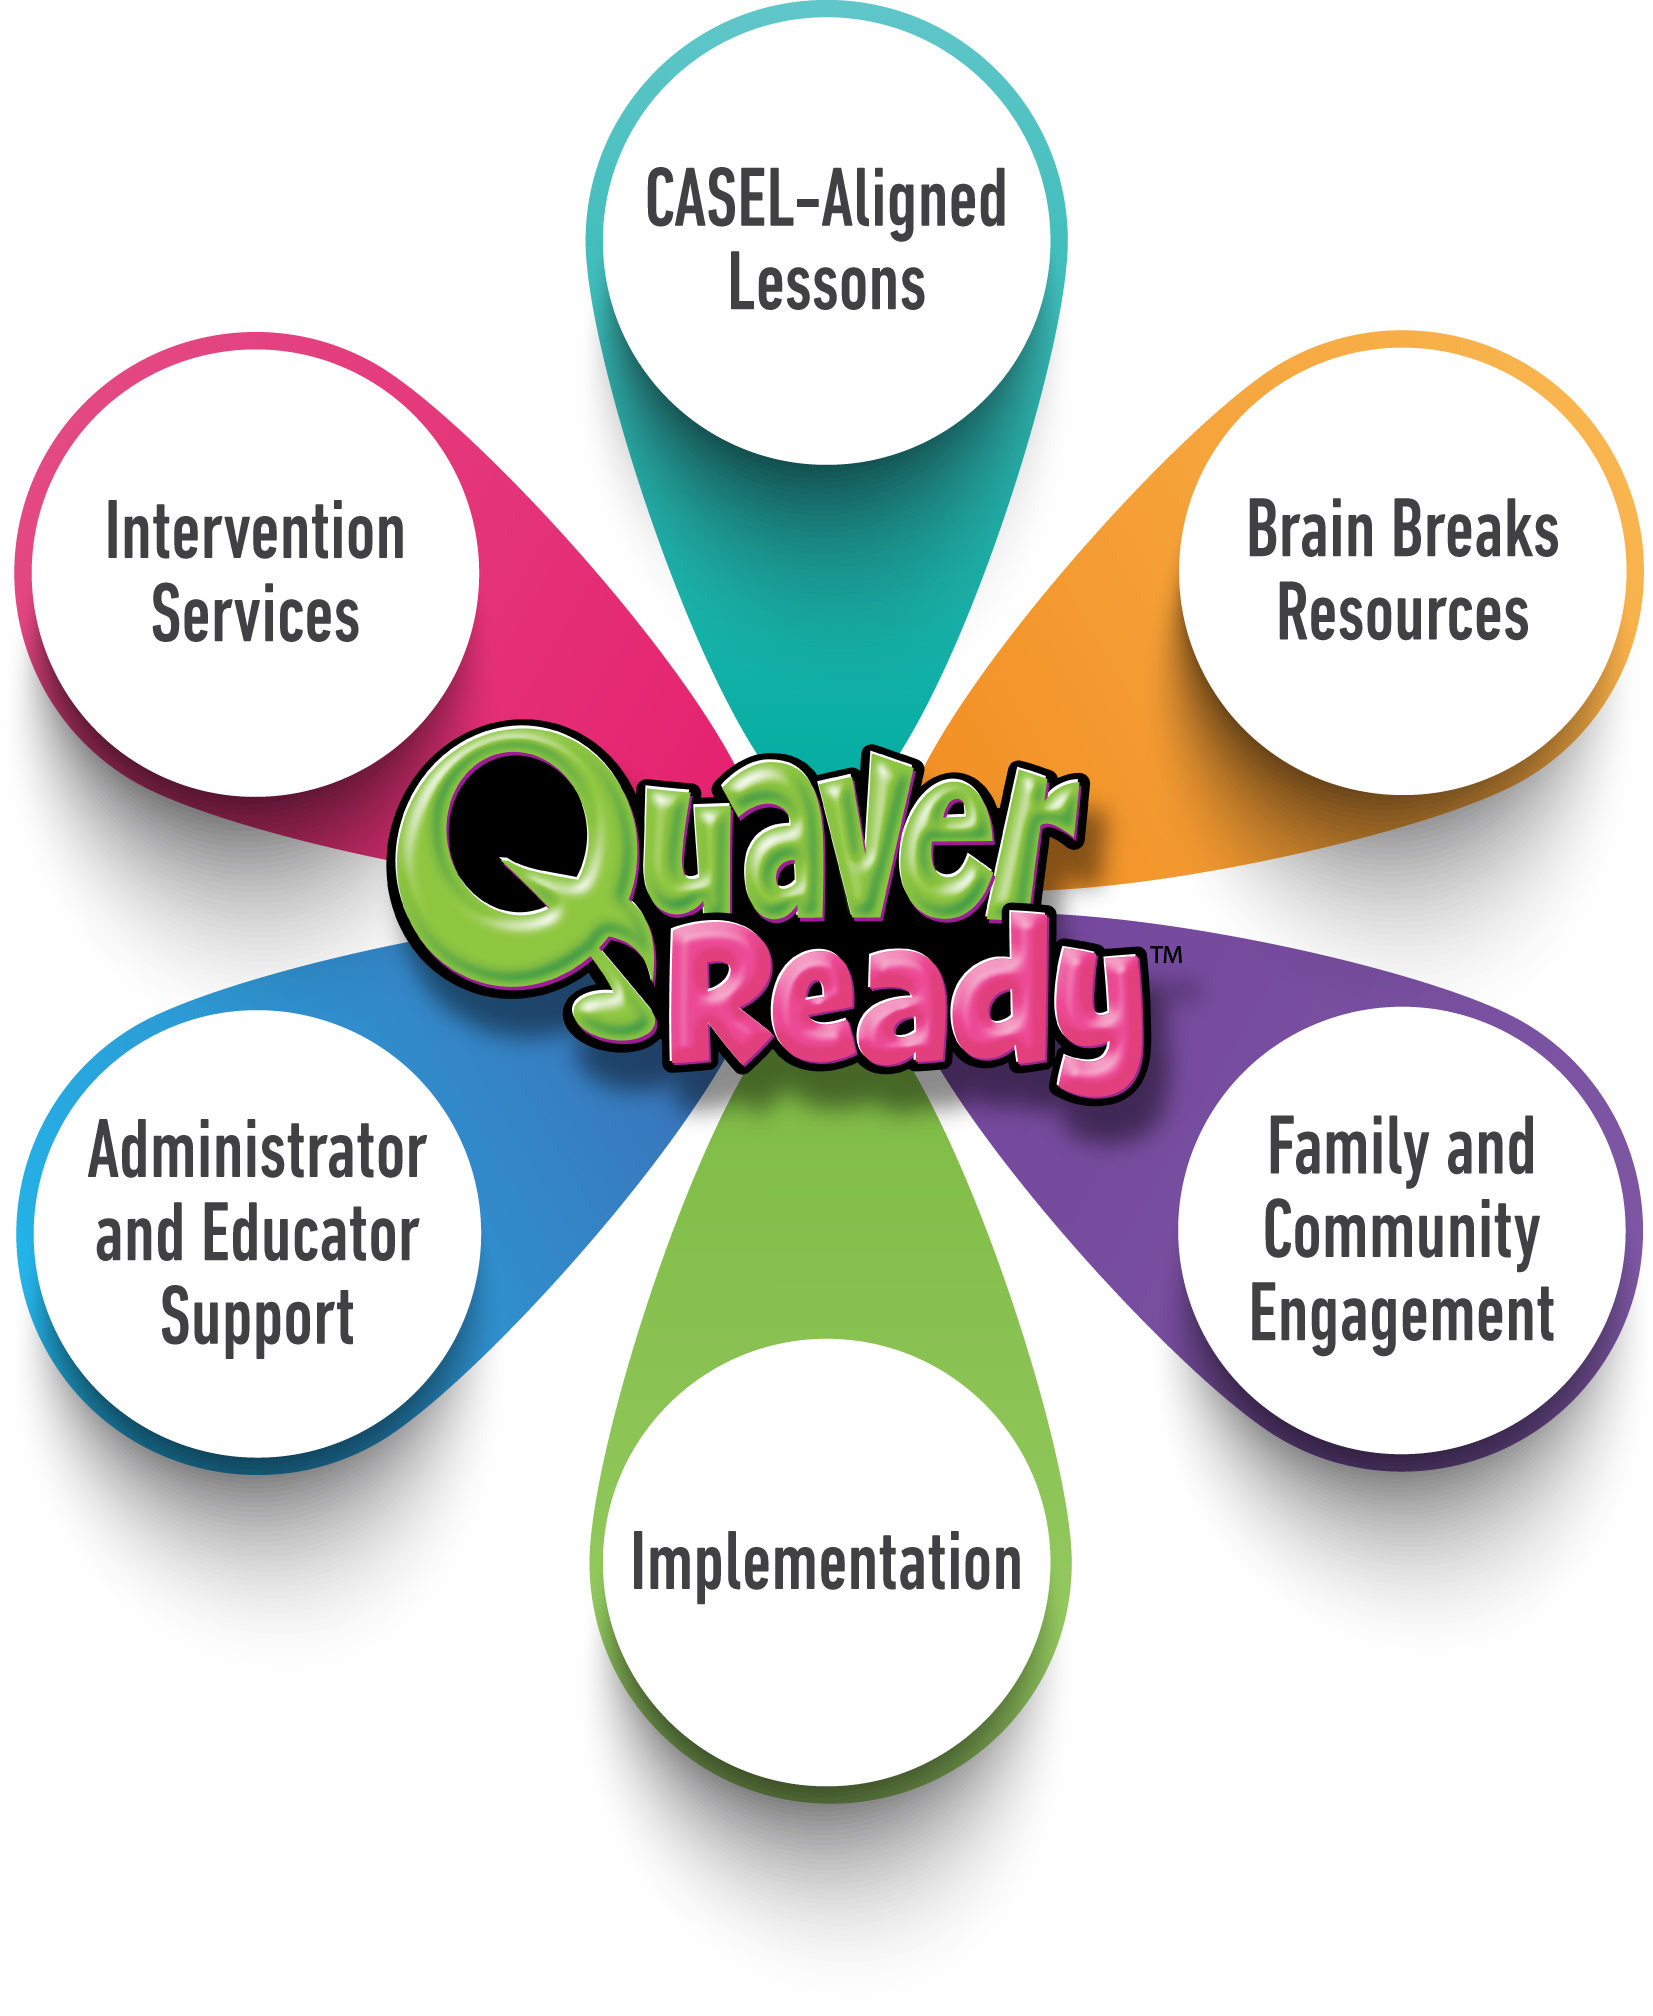 Quaver Ready graphic showing various resources available with Quaver Ready. These include CASEL-Aligned lessons, Brain breaks resources, family and community engagement, implementation, administrator and educator support, and intervention services.